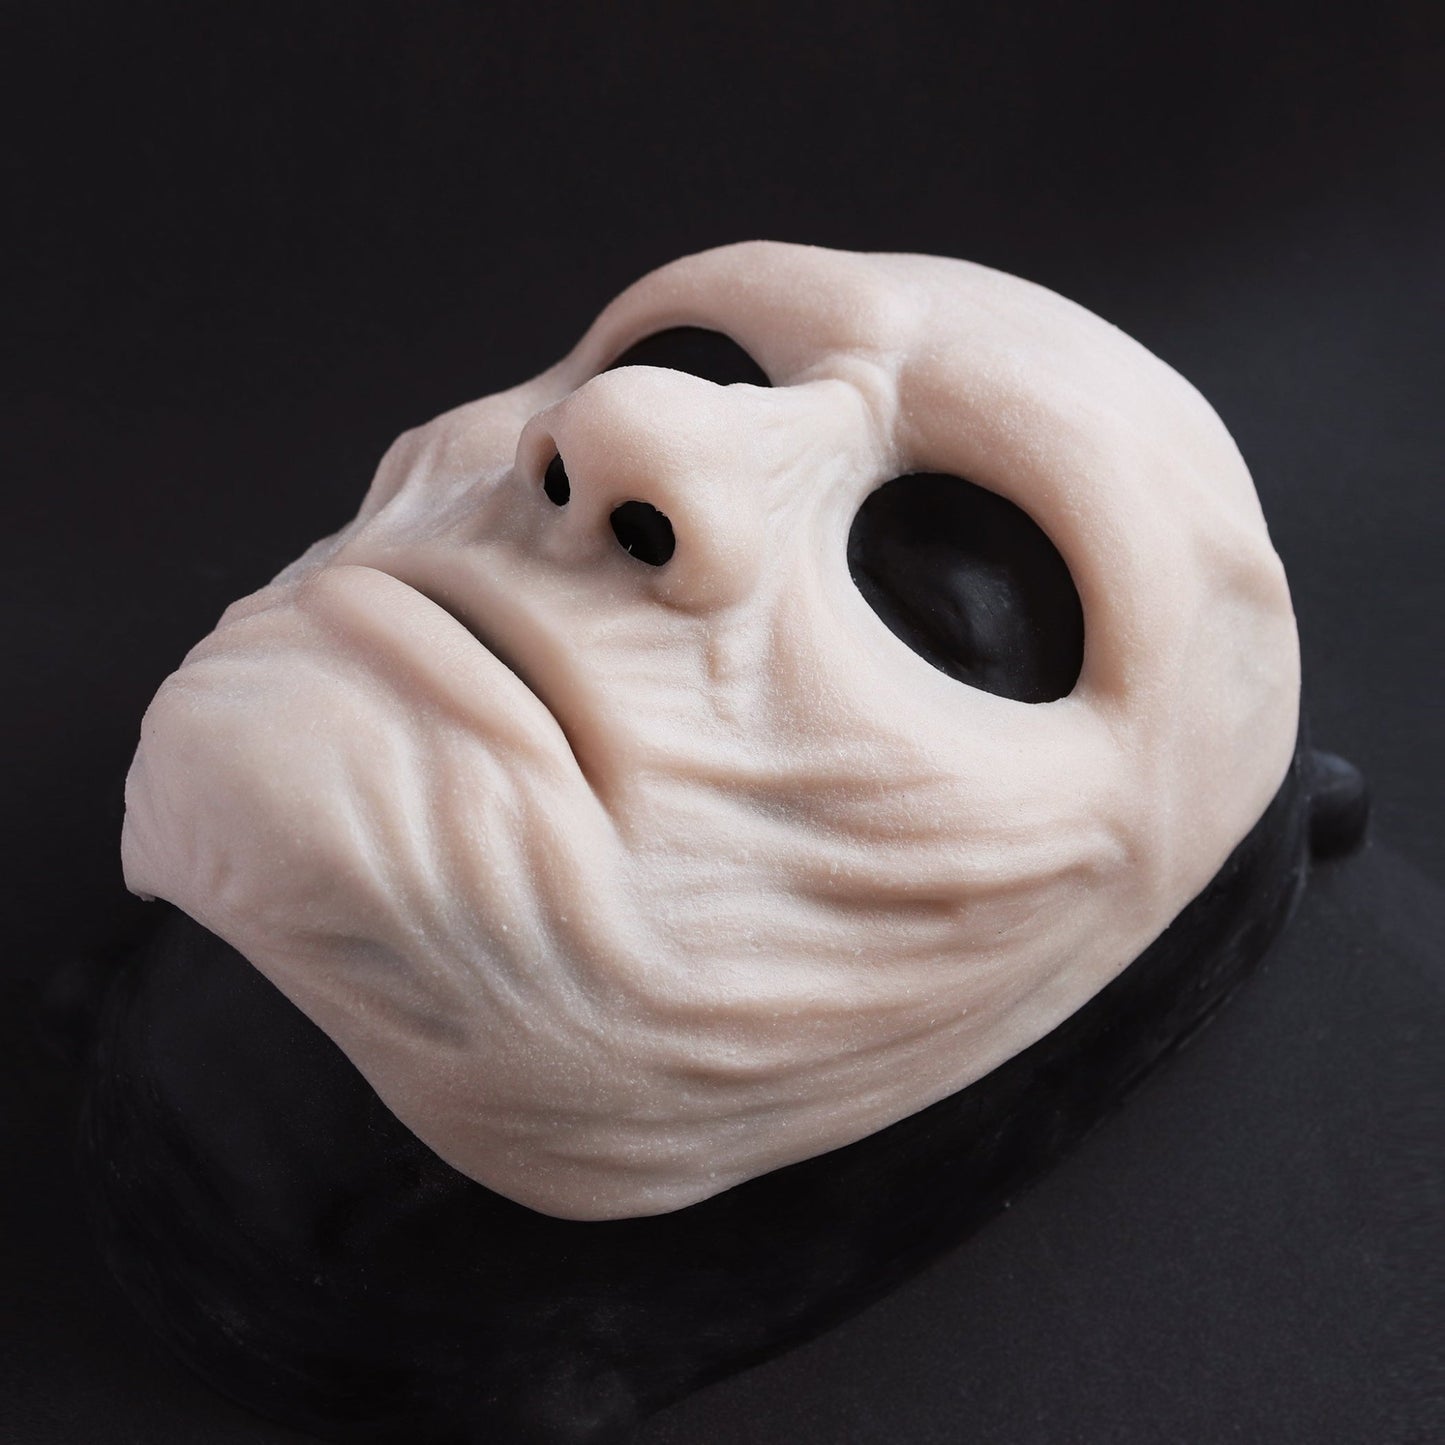 Ghoul Mask - Silicone makeup prosthetic in vanilla shade on a black surface